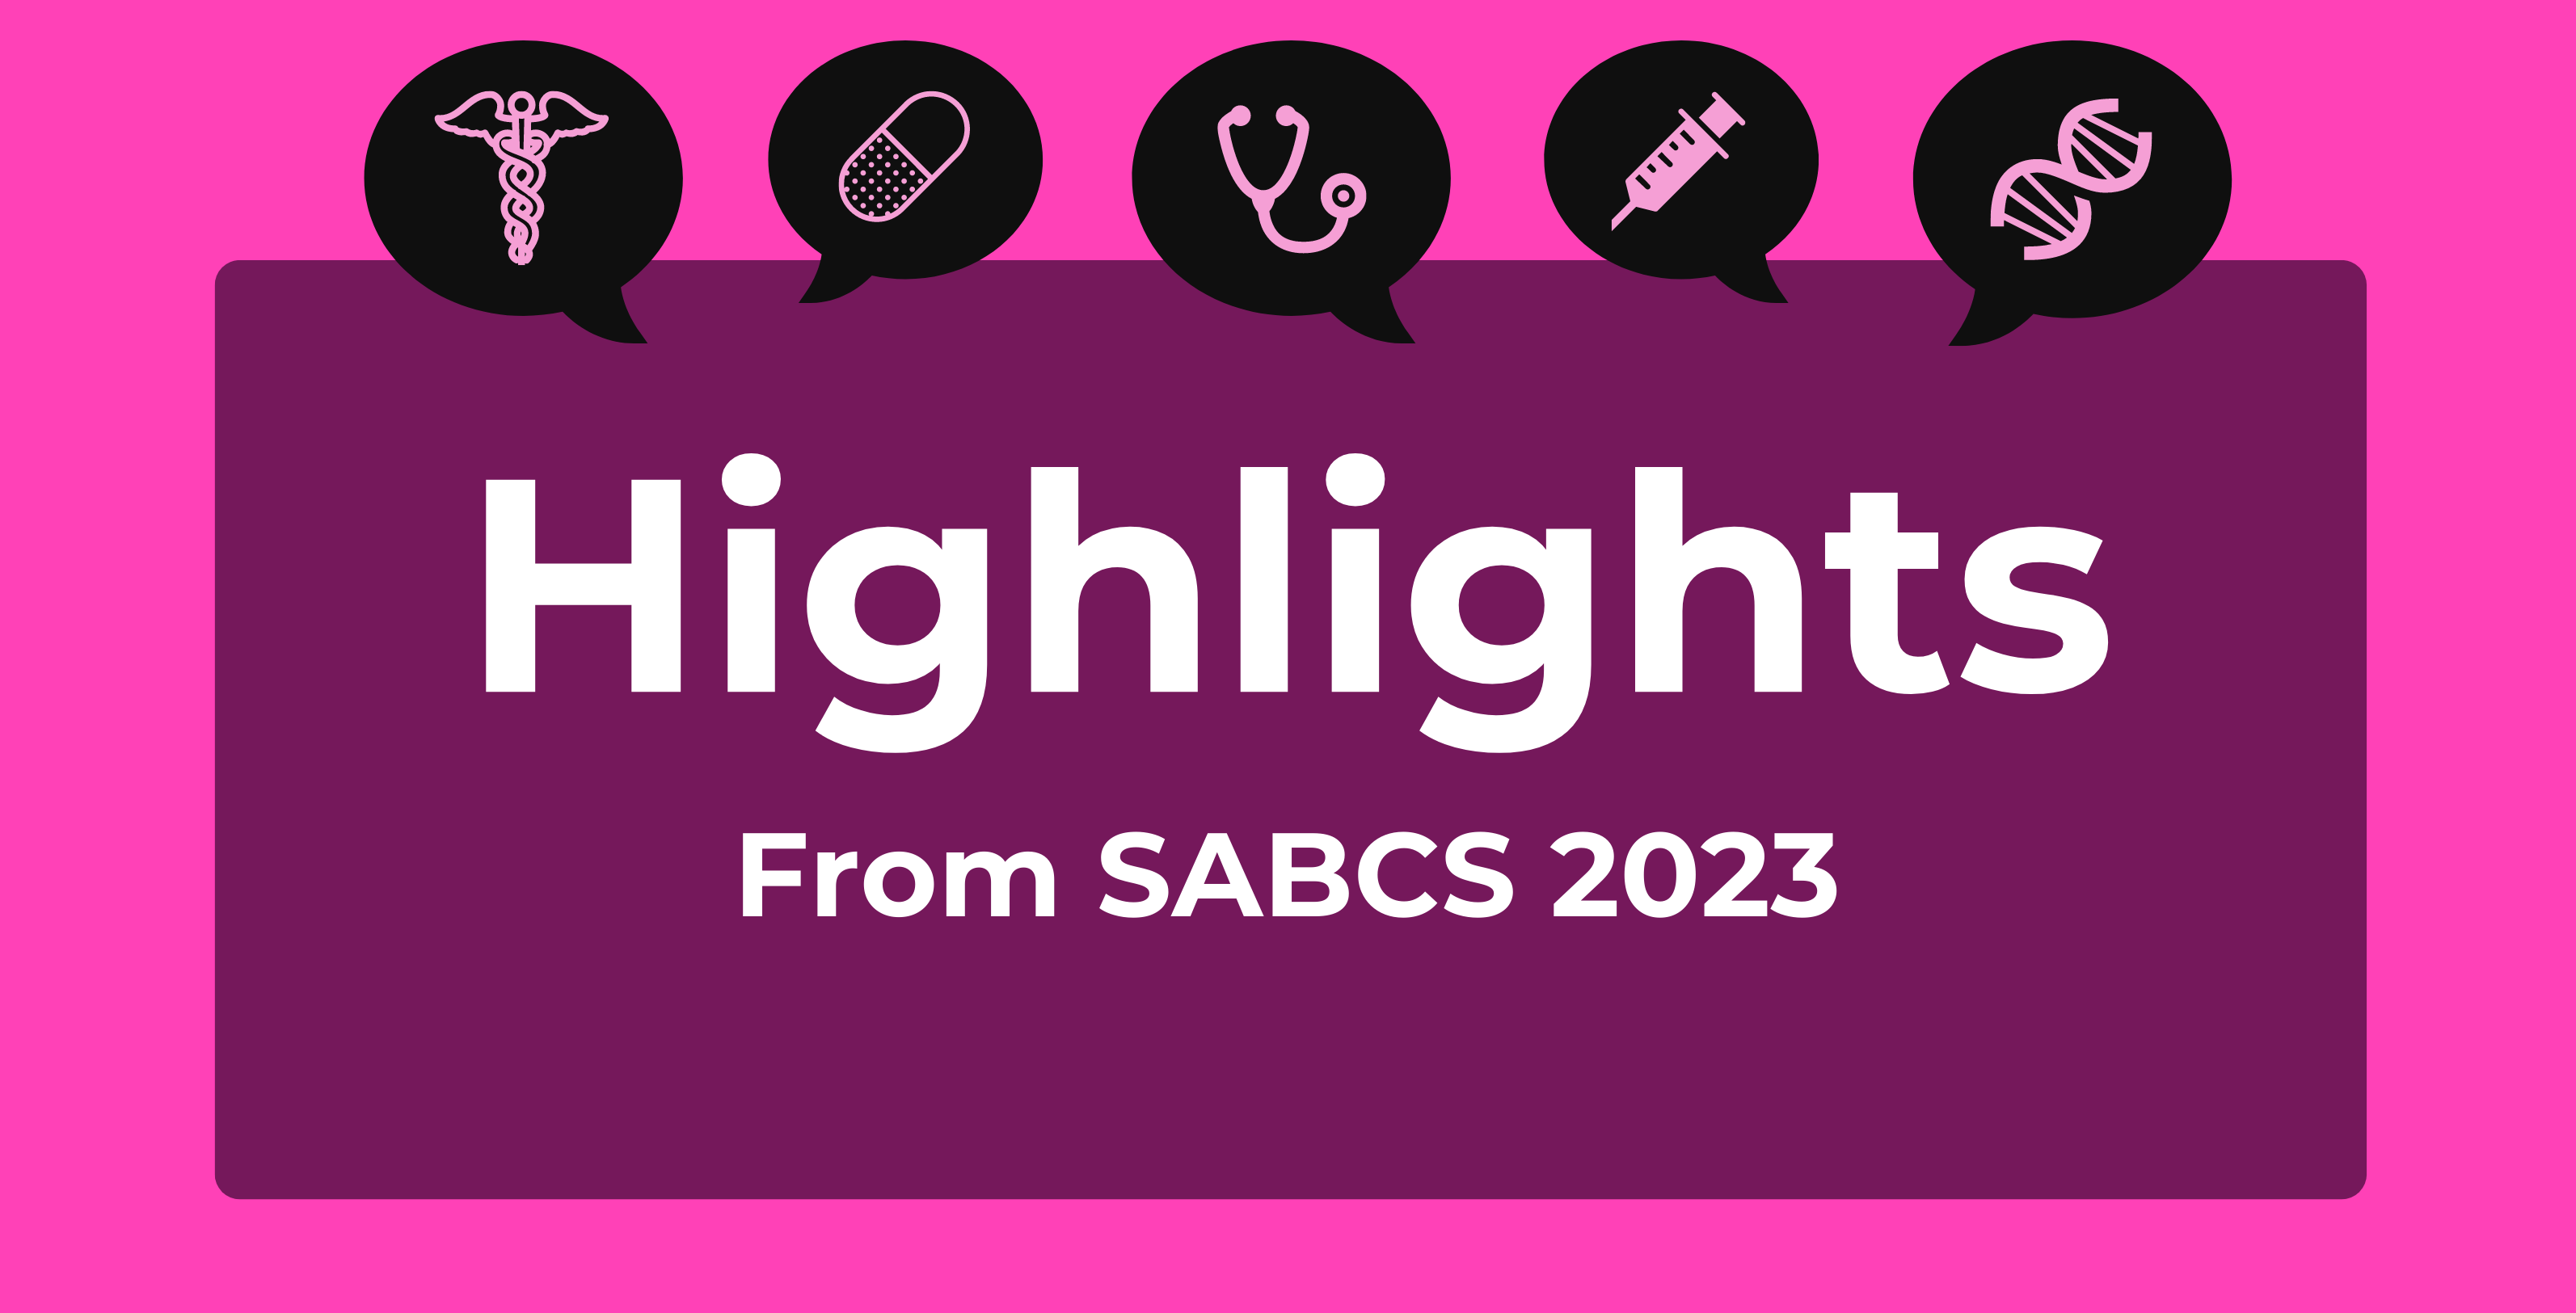 ICYMI: Highlights From SABCS 2023